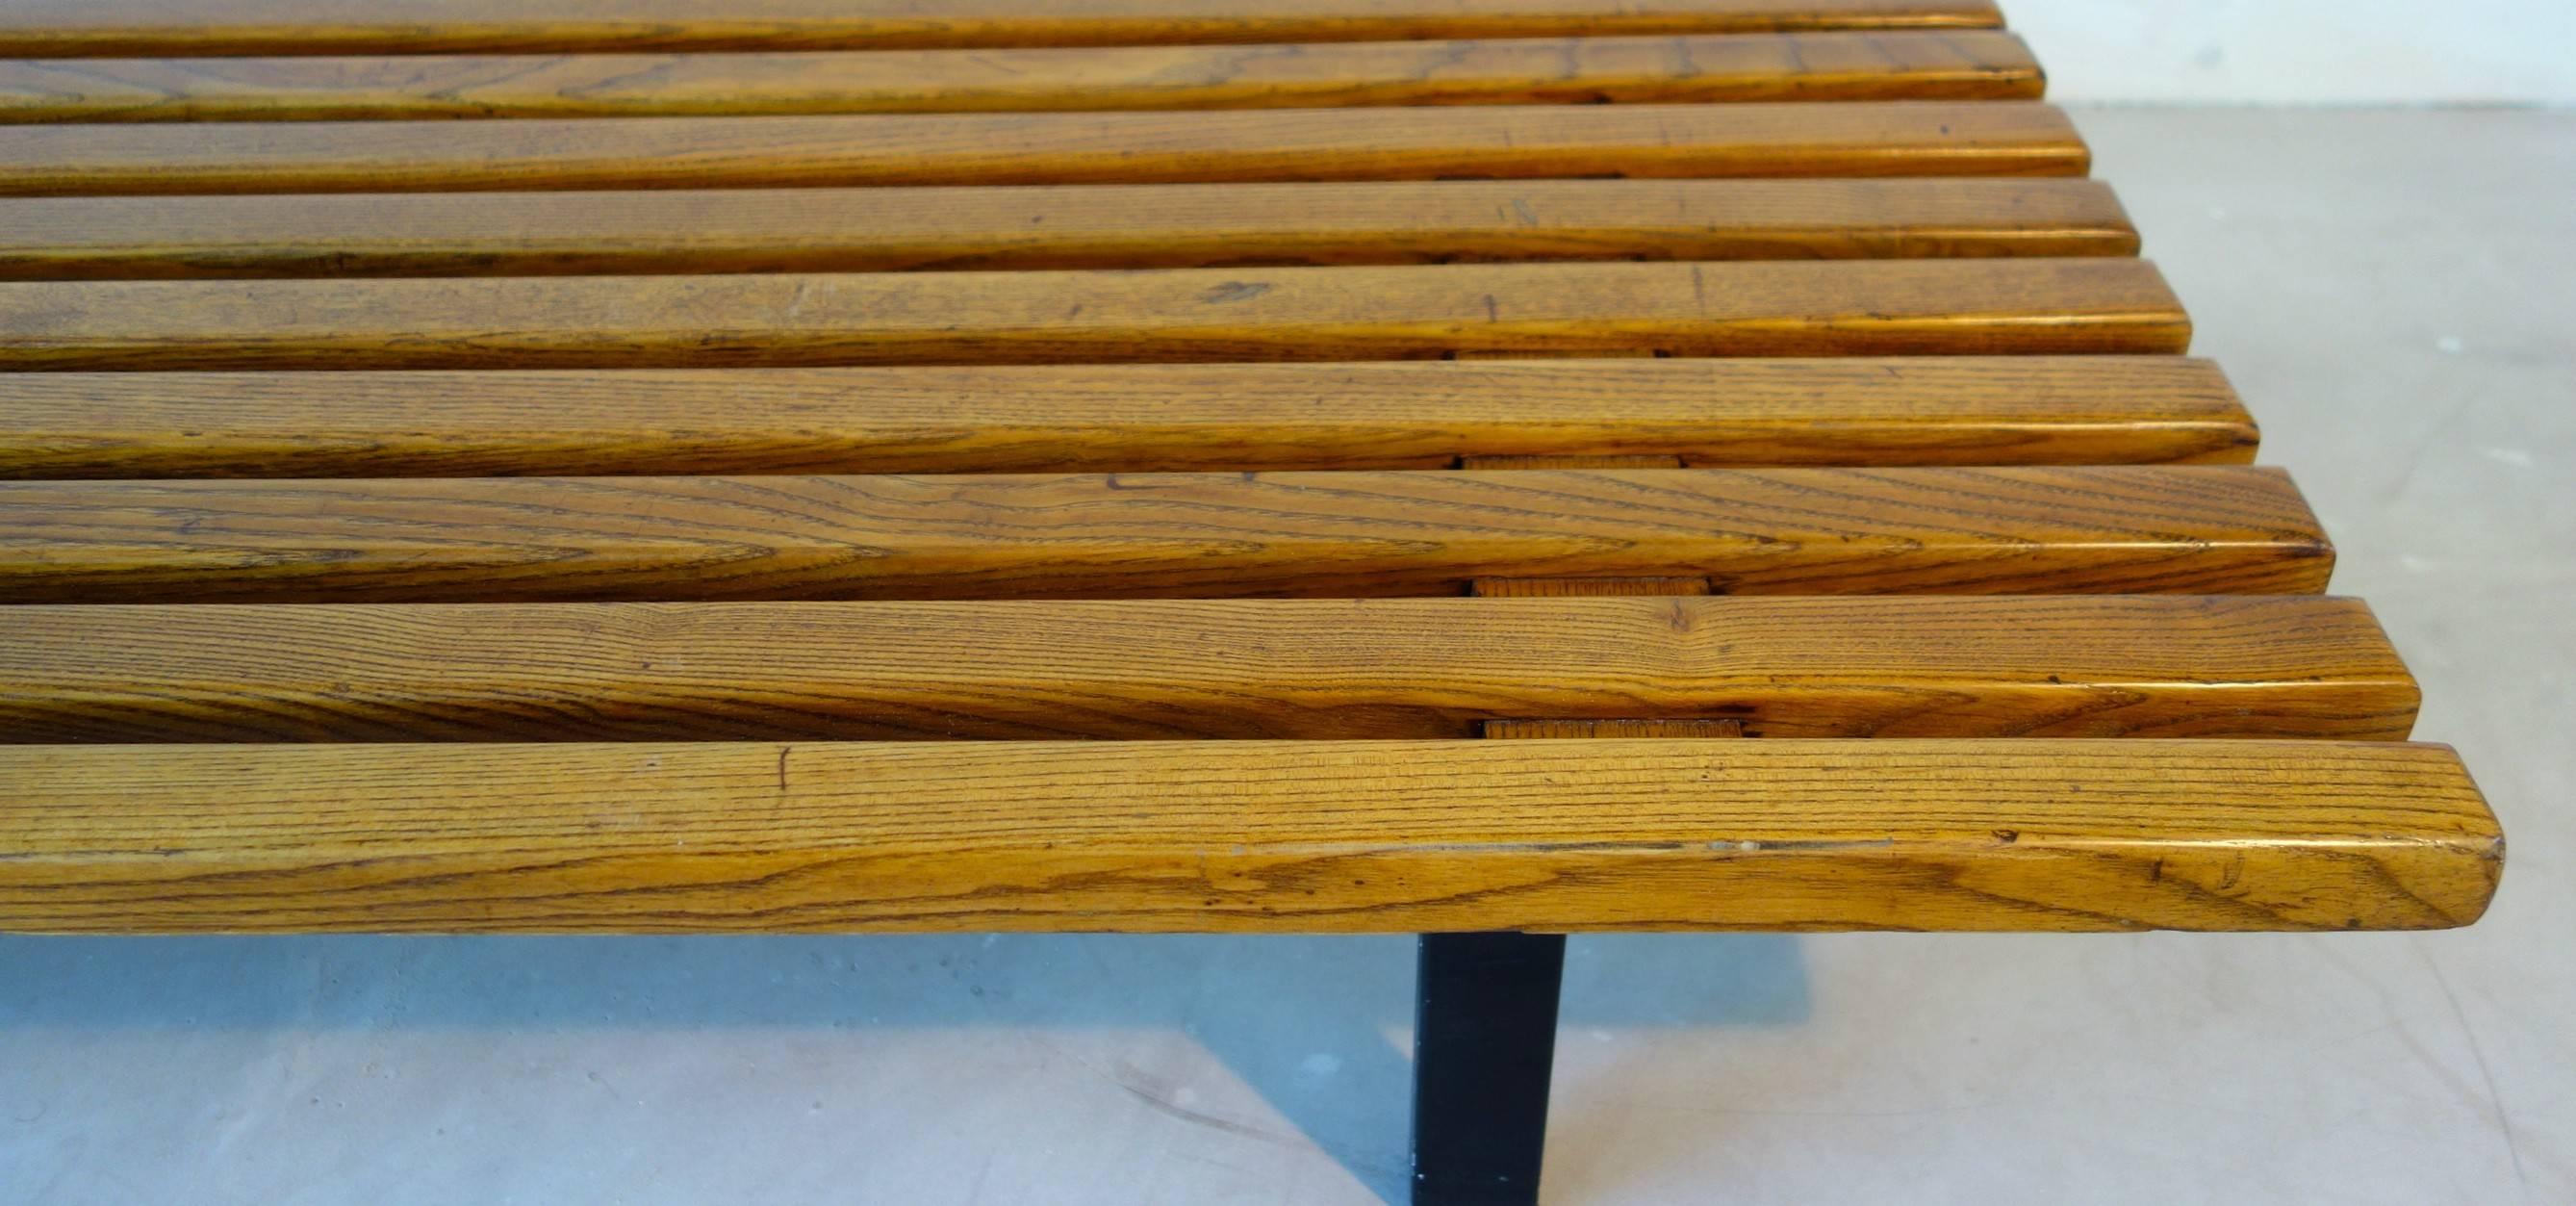 Superb and very rare Cansado Charlotte Perriand bench seat
from the mining town of Cansado in Mauritania
It is composed of 13 mahogany slats on four painted metal legs
Produced in 54 copies for La cité minière de Cansado in Mauritania.
An equivalent